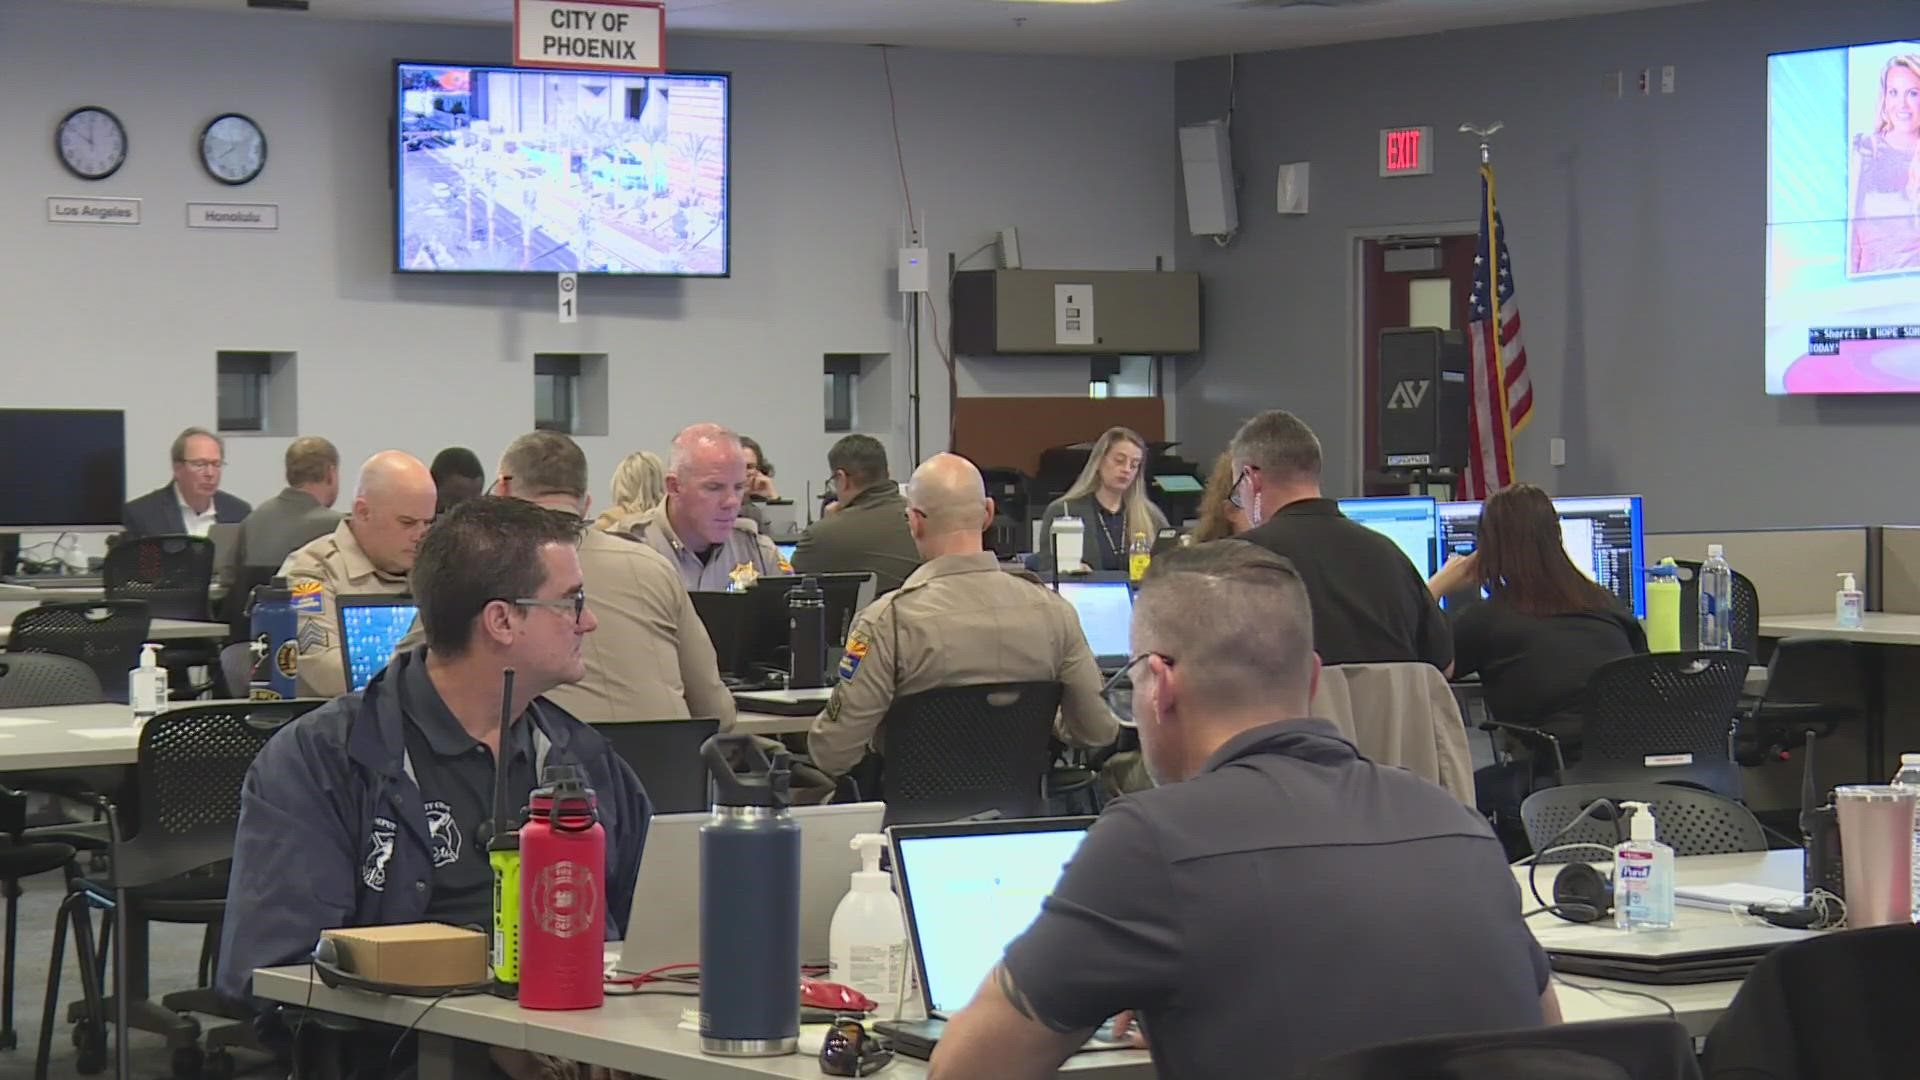 12News got an inside look at how dozens of agencies are working together to keep everyone in the Valley safe during the Super Bowl festivities.